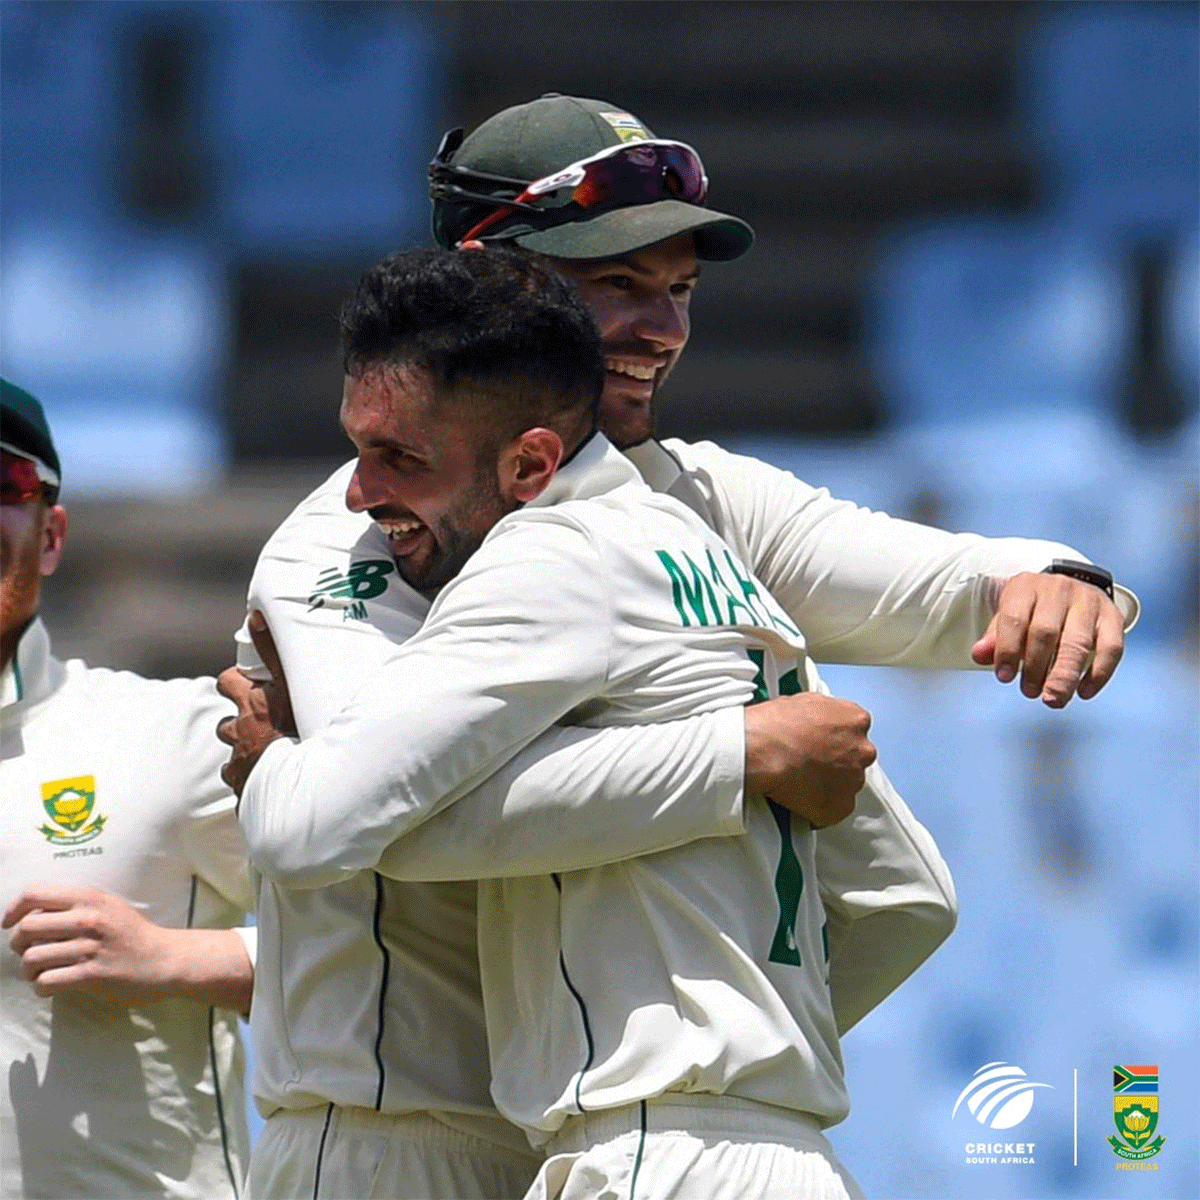 South Africa's Keshav Maharaj hugs captain Dean Elgar after taking a hat-trick. Maharaj picked the 7th Test fifer of his career as he took the Proteas to victory over the West Indies on Monday